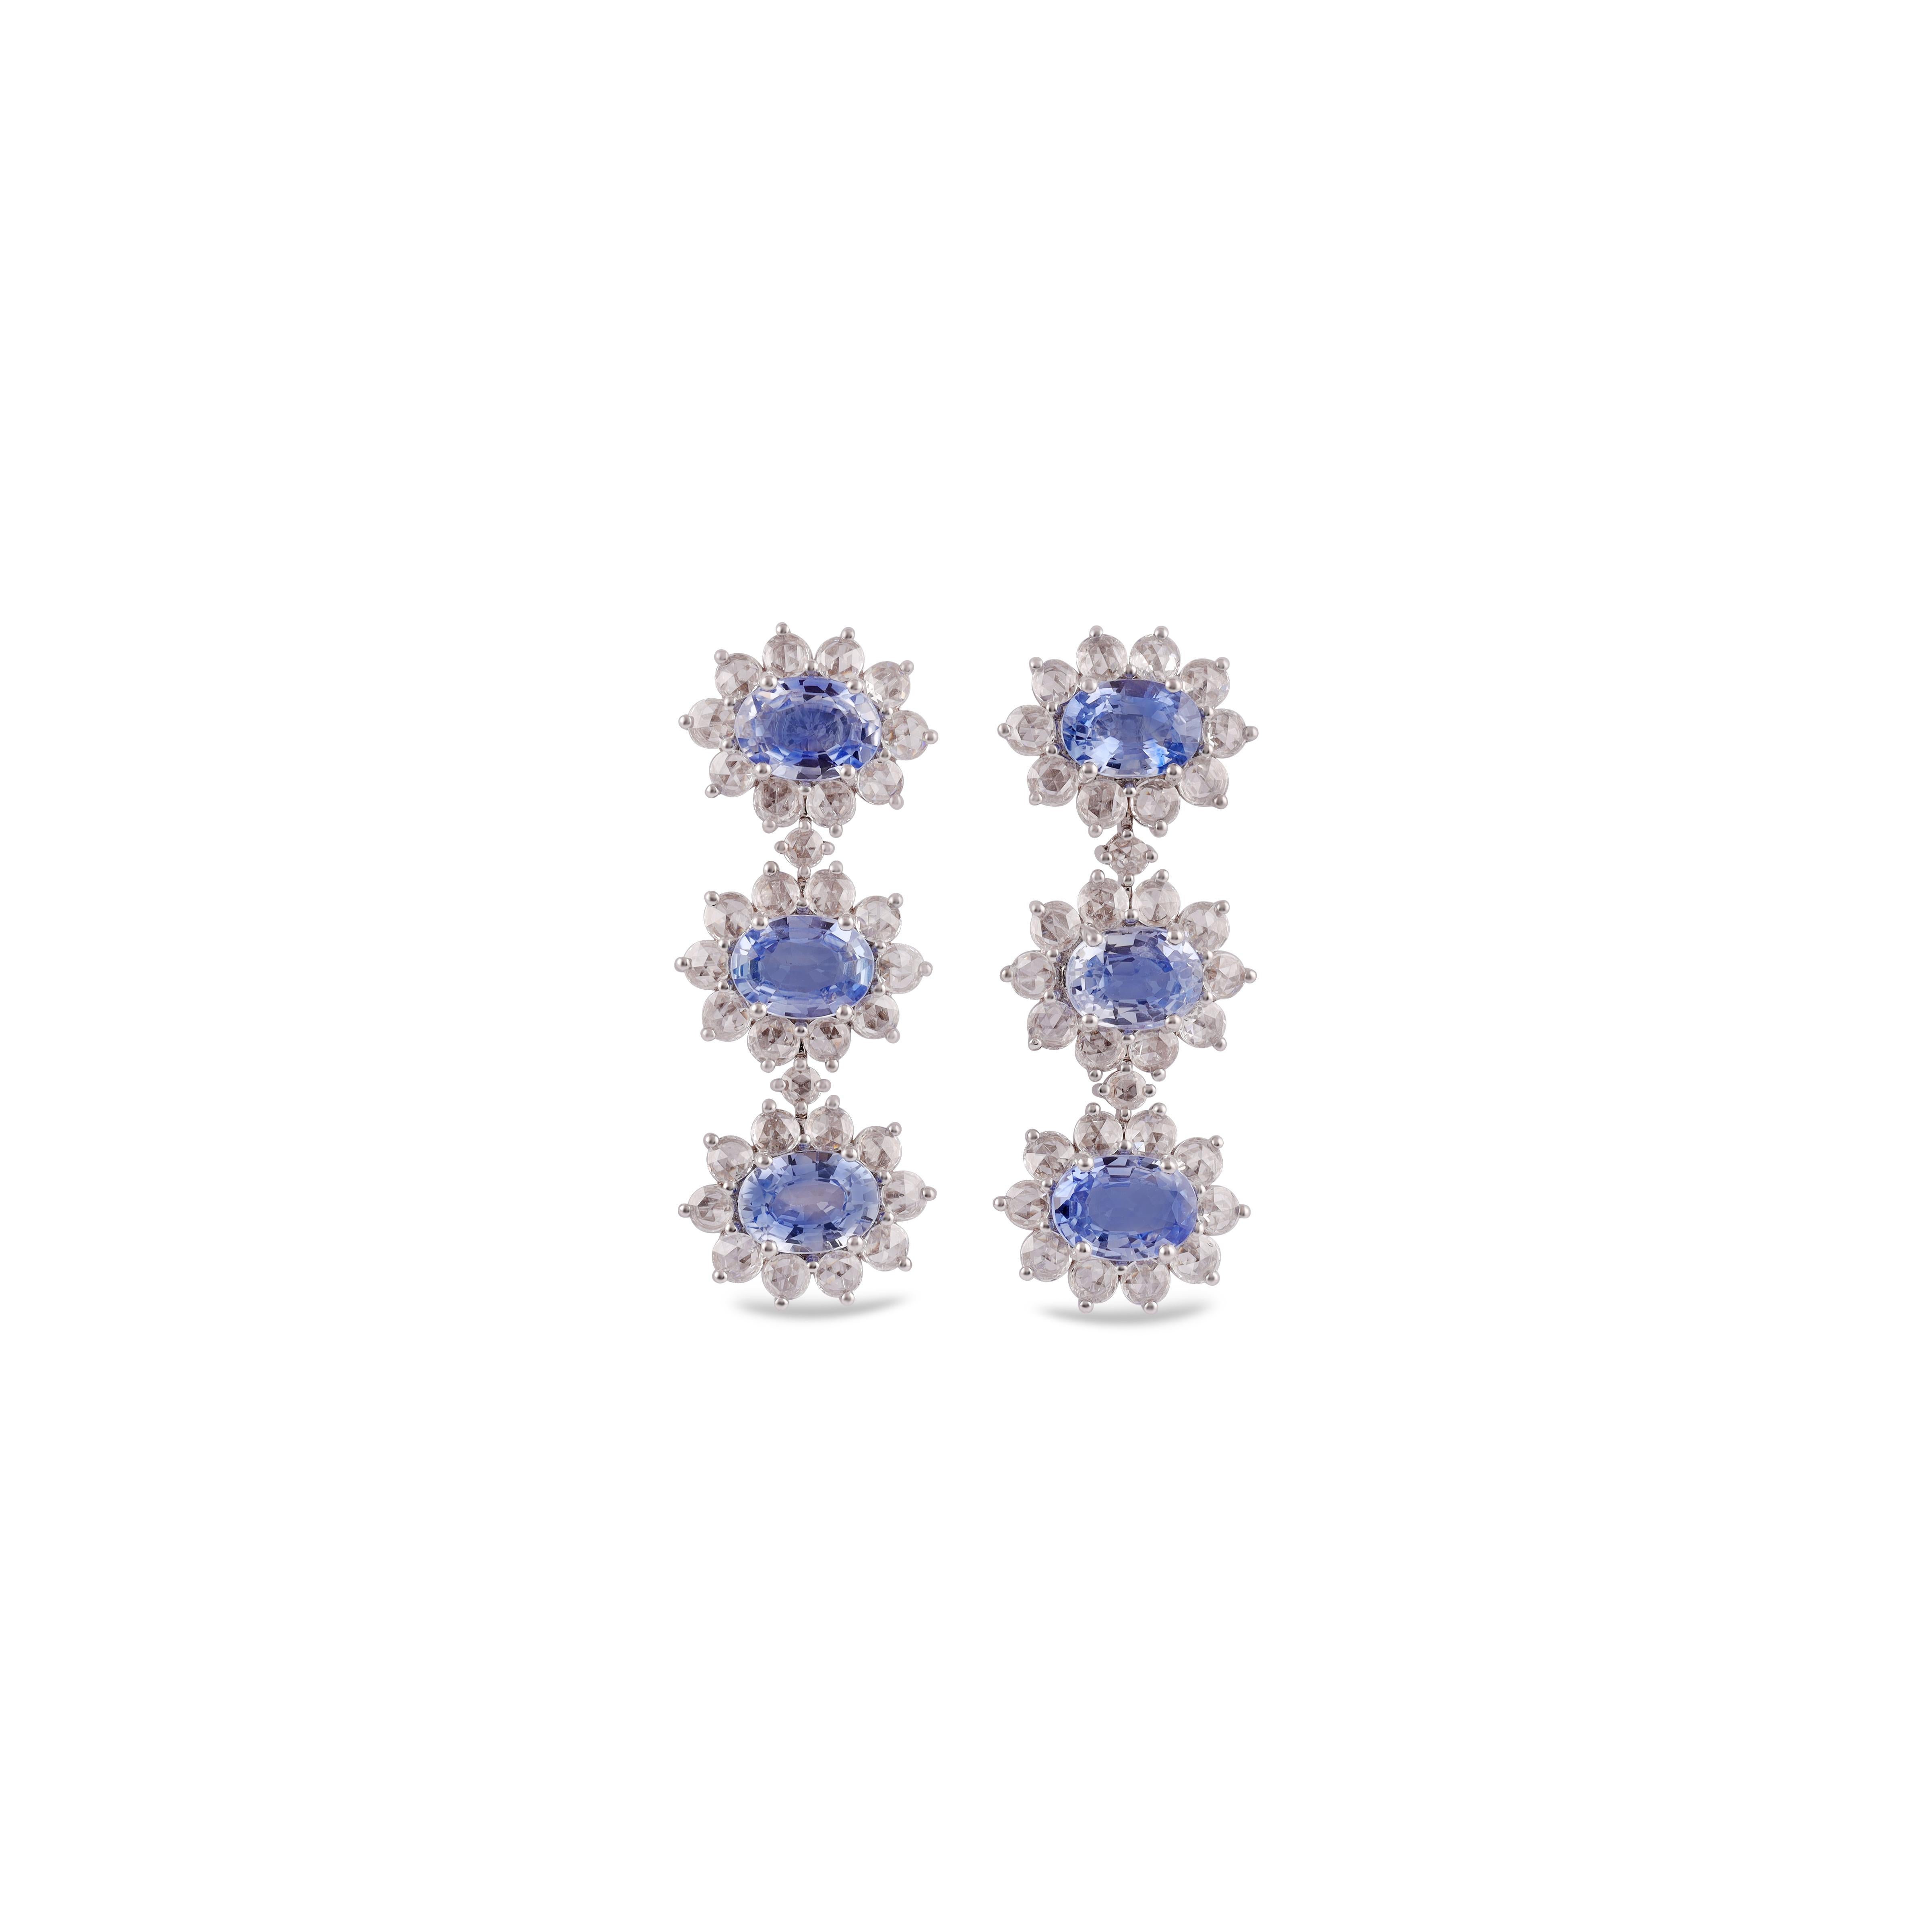 Oval Cut Blue Sapphire and Diamond Earring Studded in 18 Karat White Gold